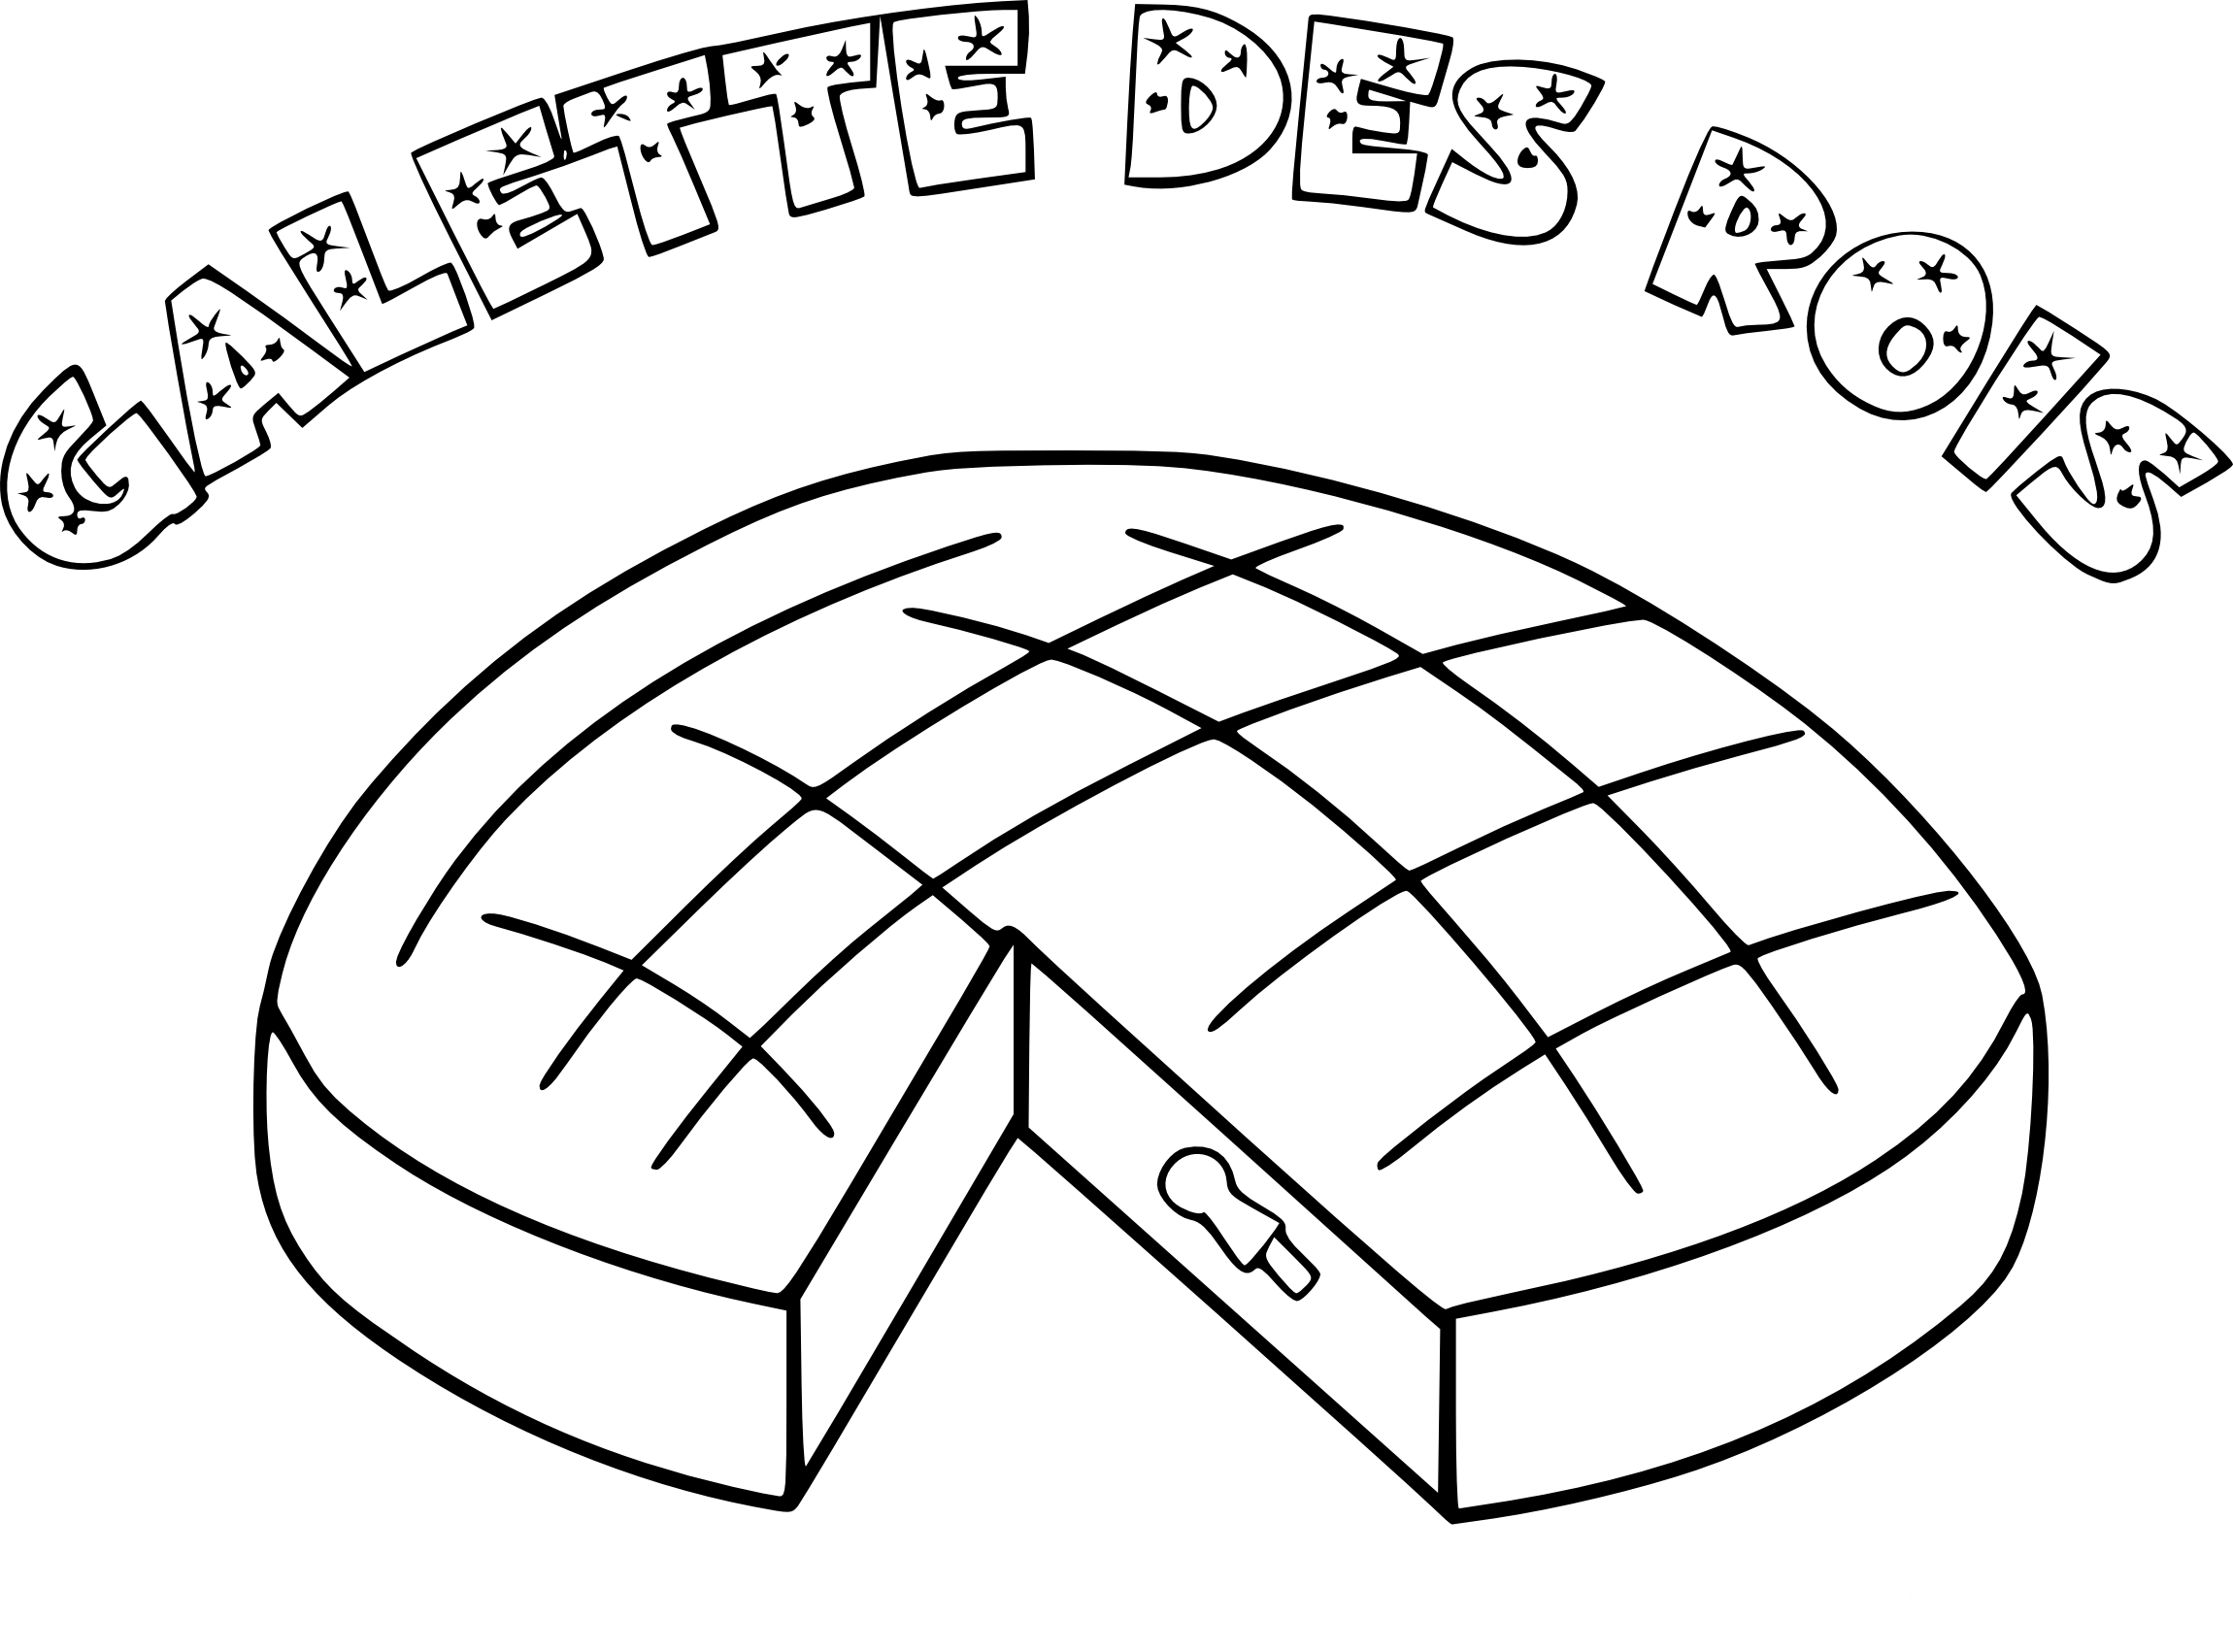 Kings Cake drawing and coloring page